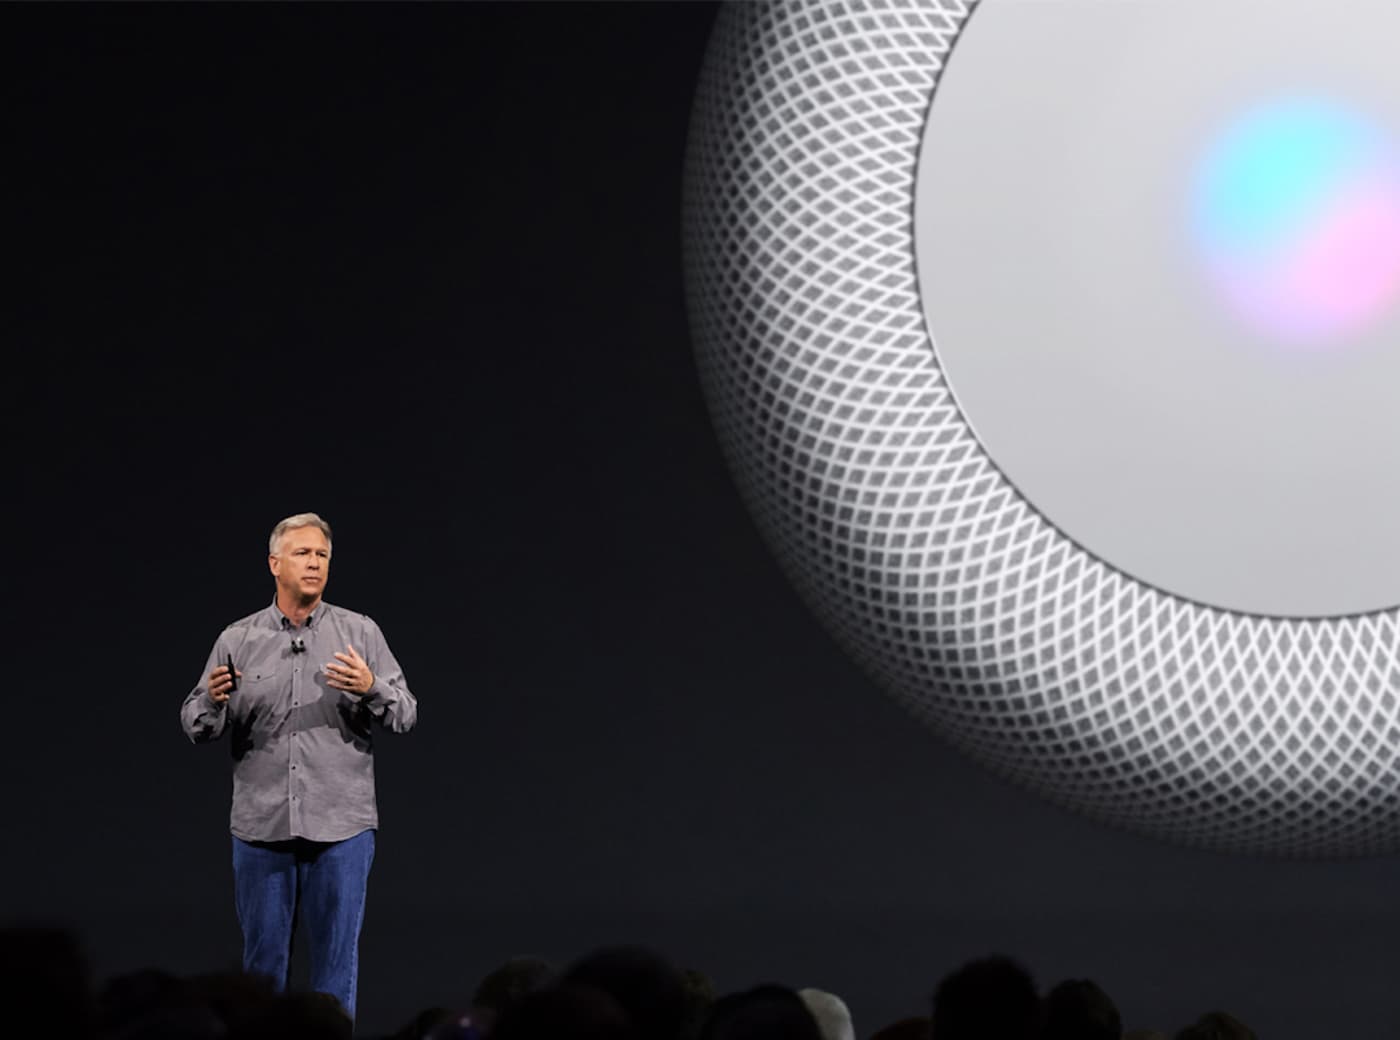 Phil Schiller said Apple won't release the HomePod till it's satisfied with the quality.